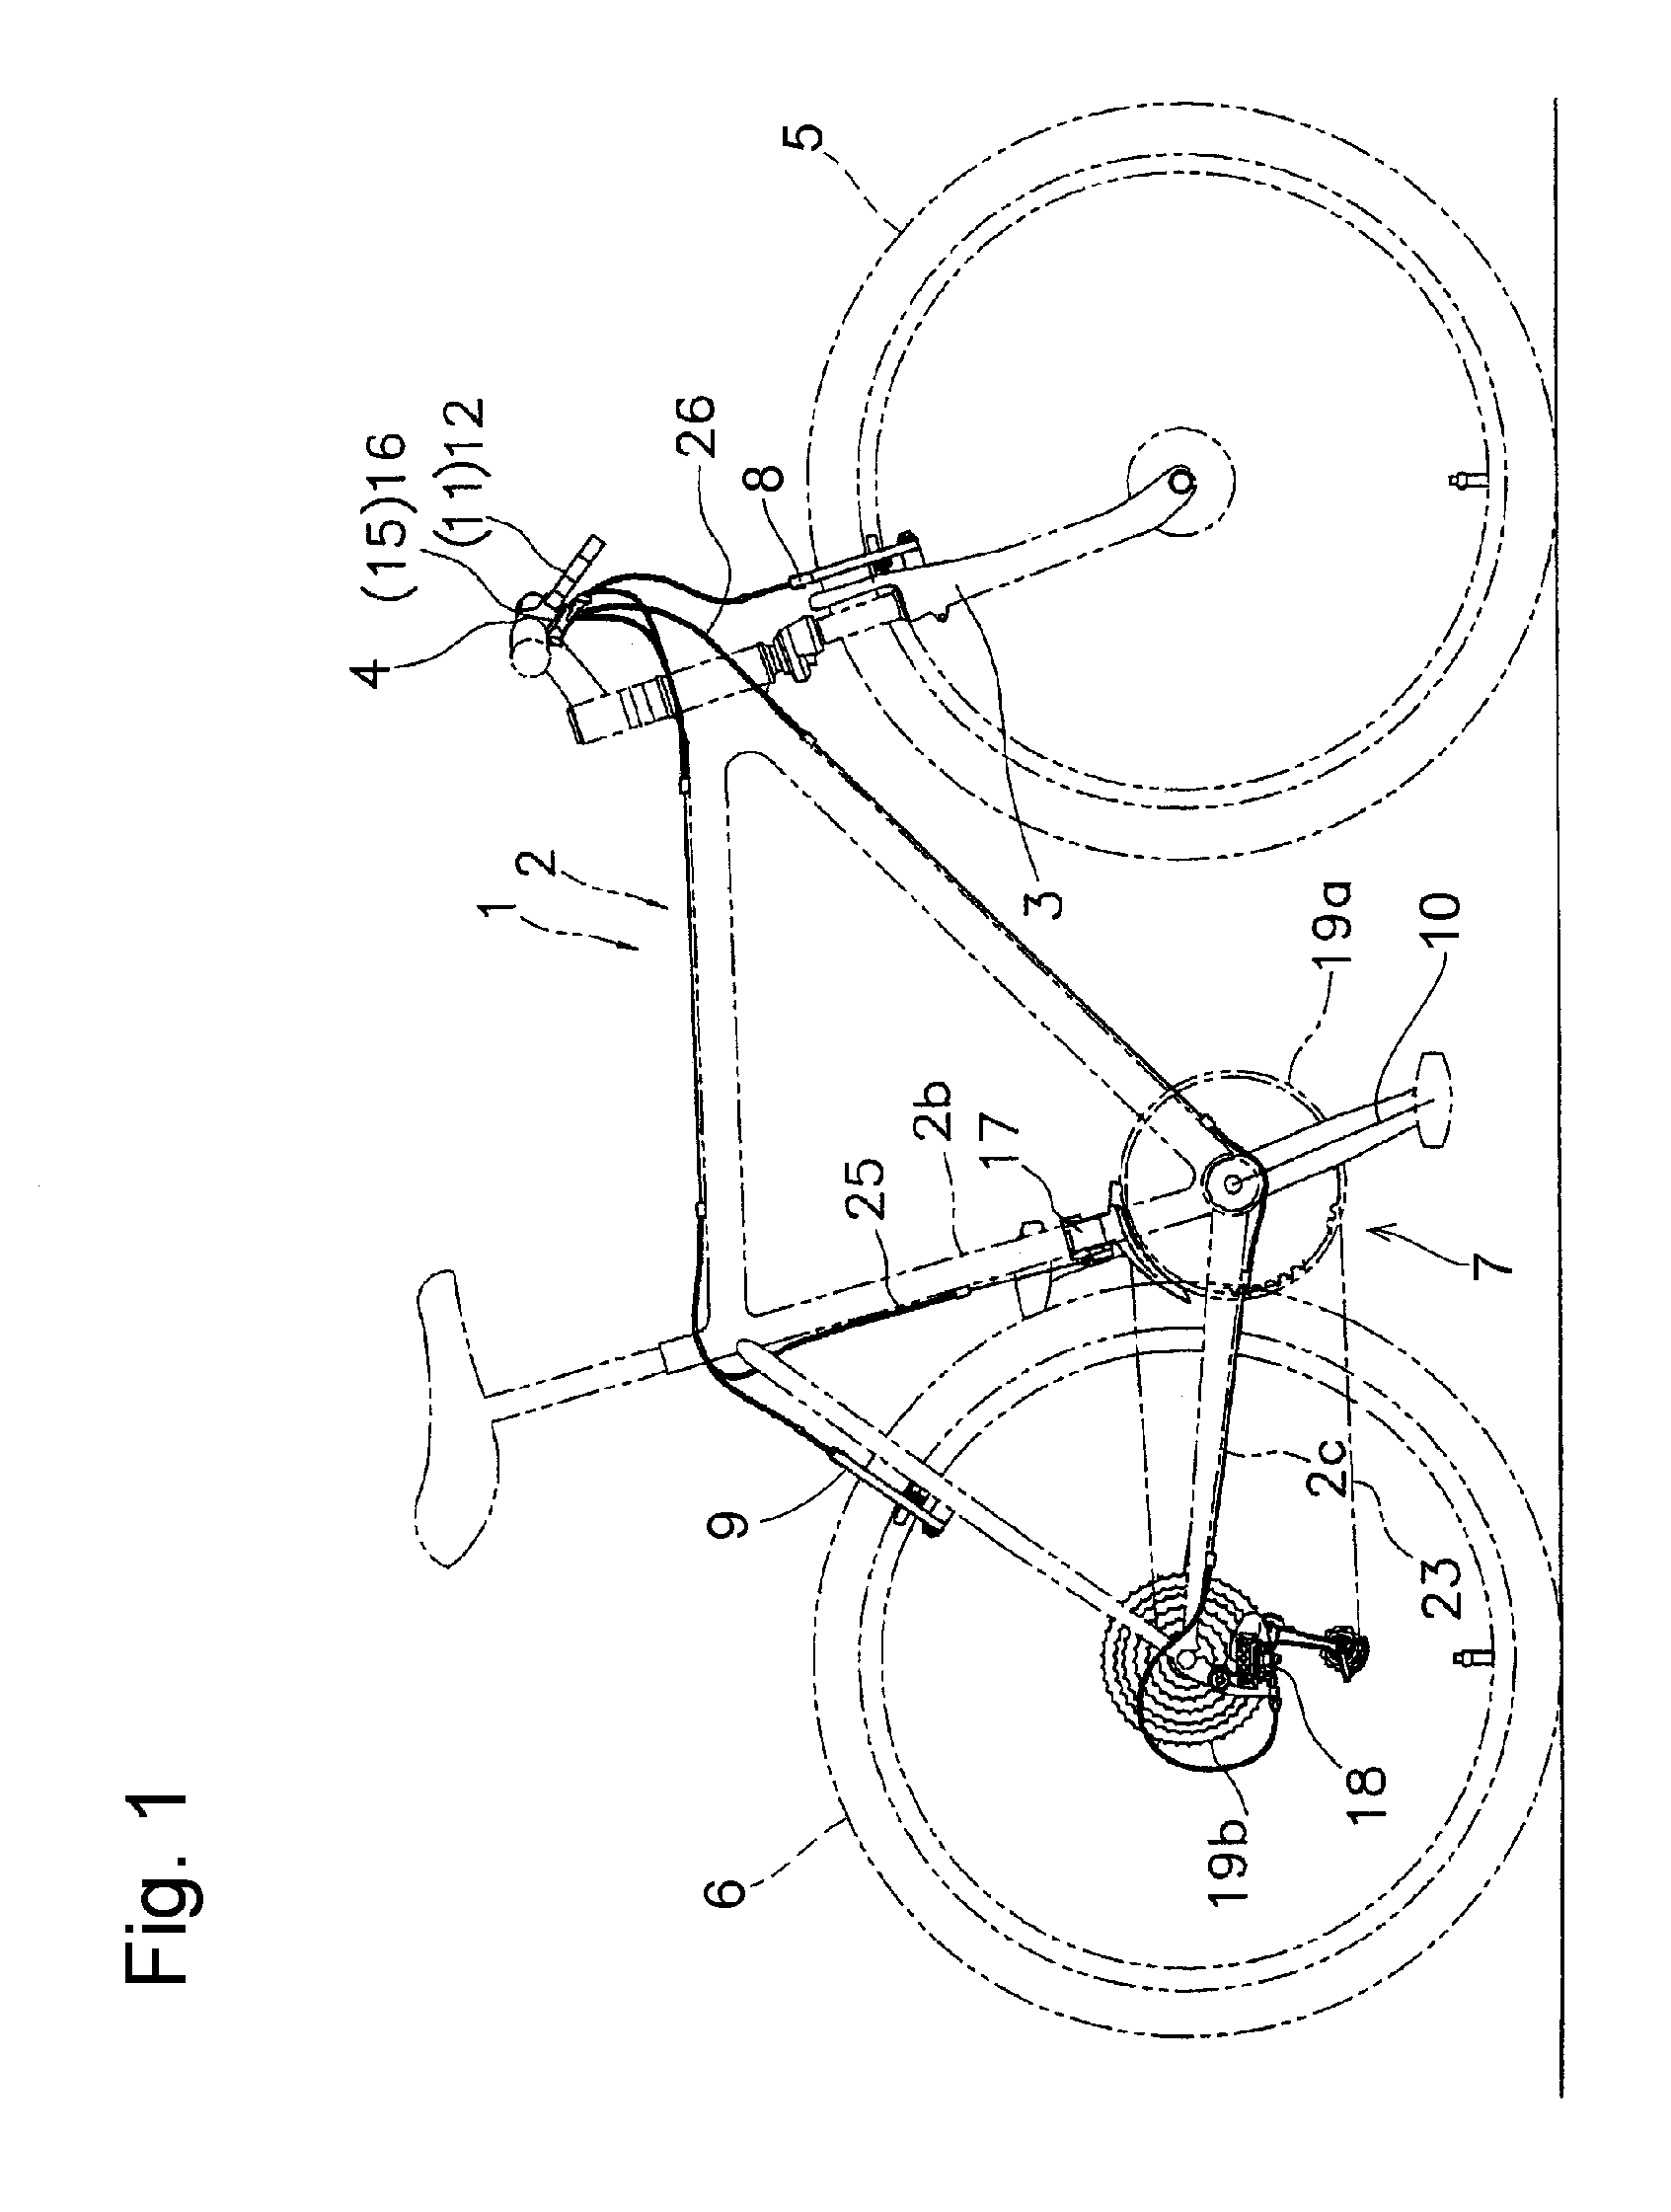 Motion resisting apparatus for a bicycle derailleur